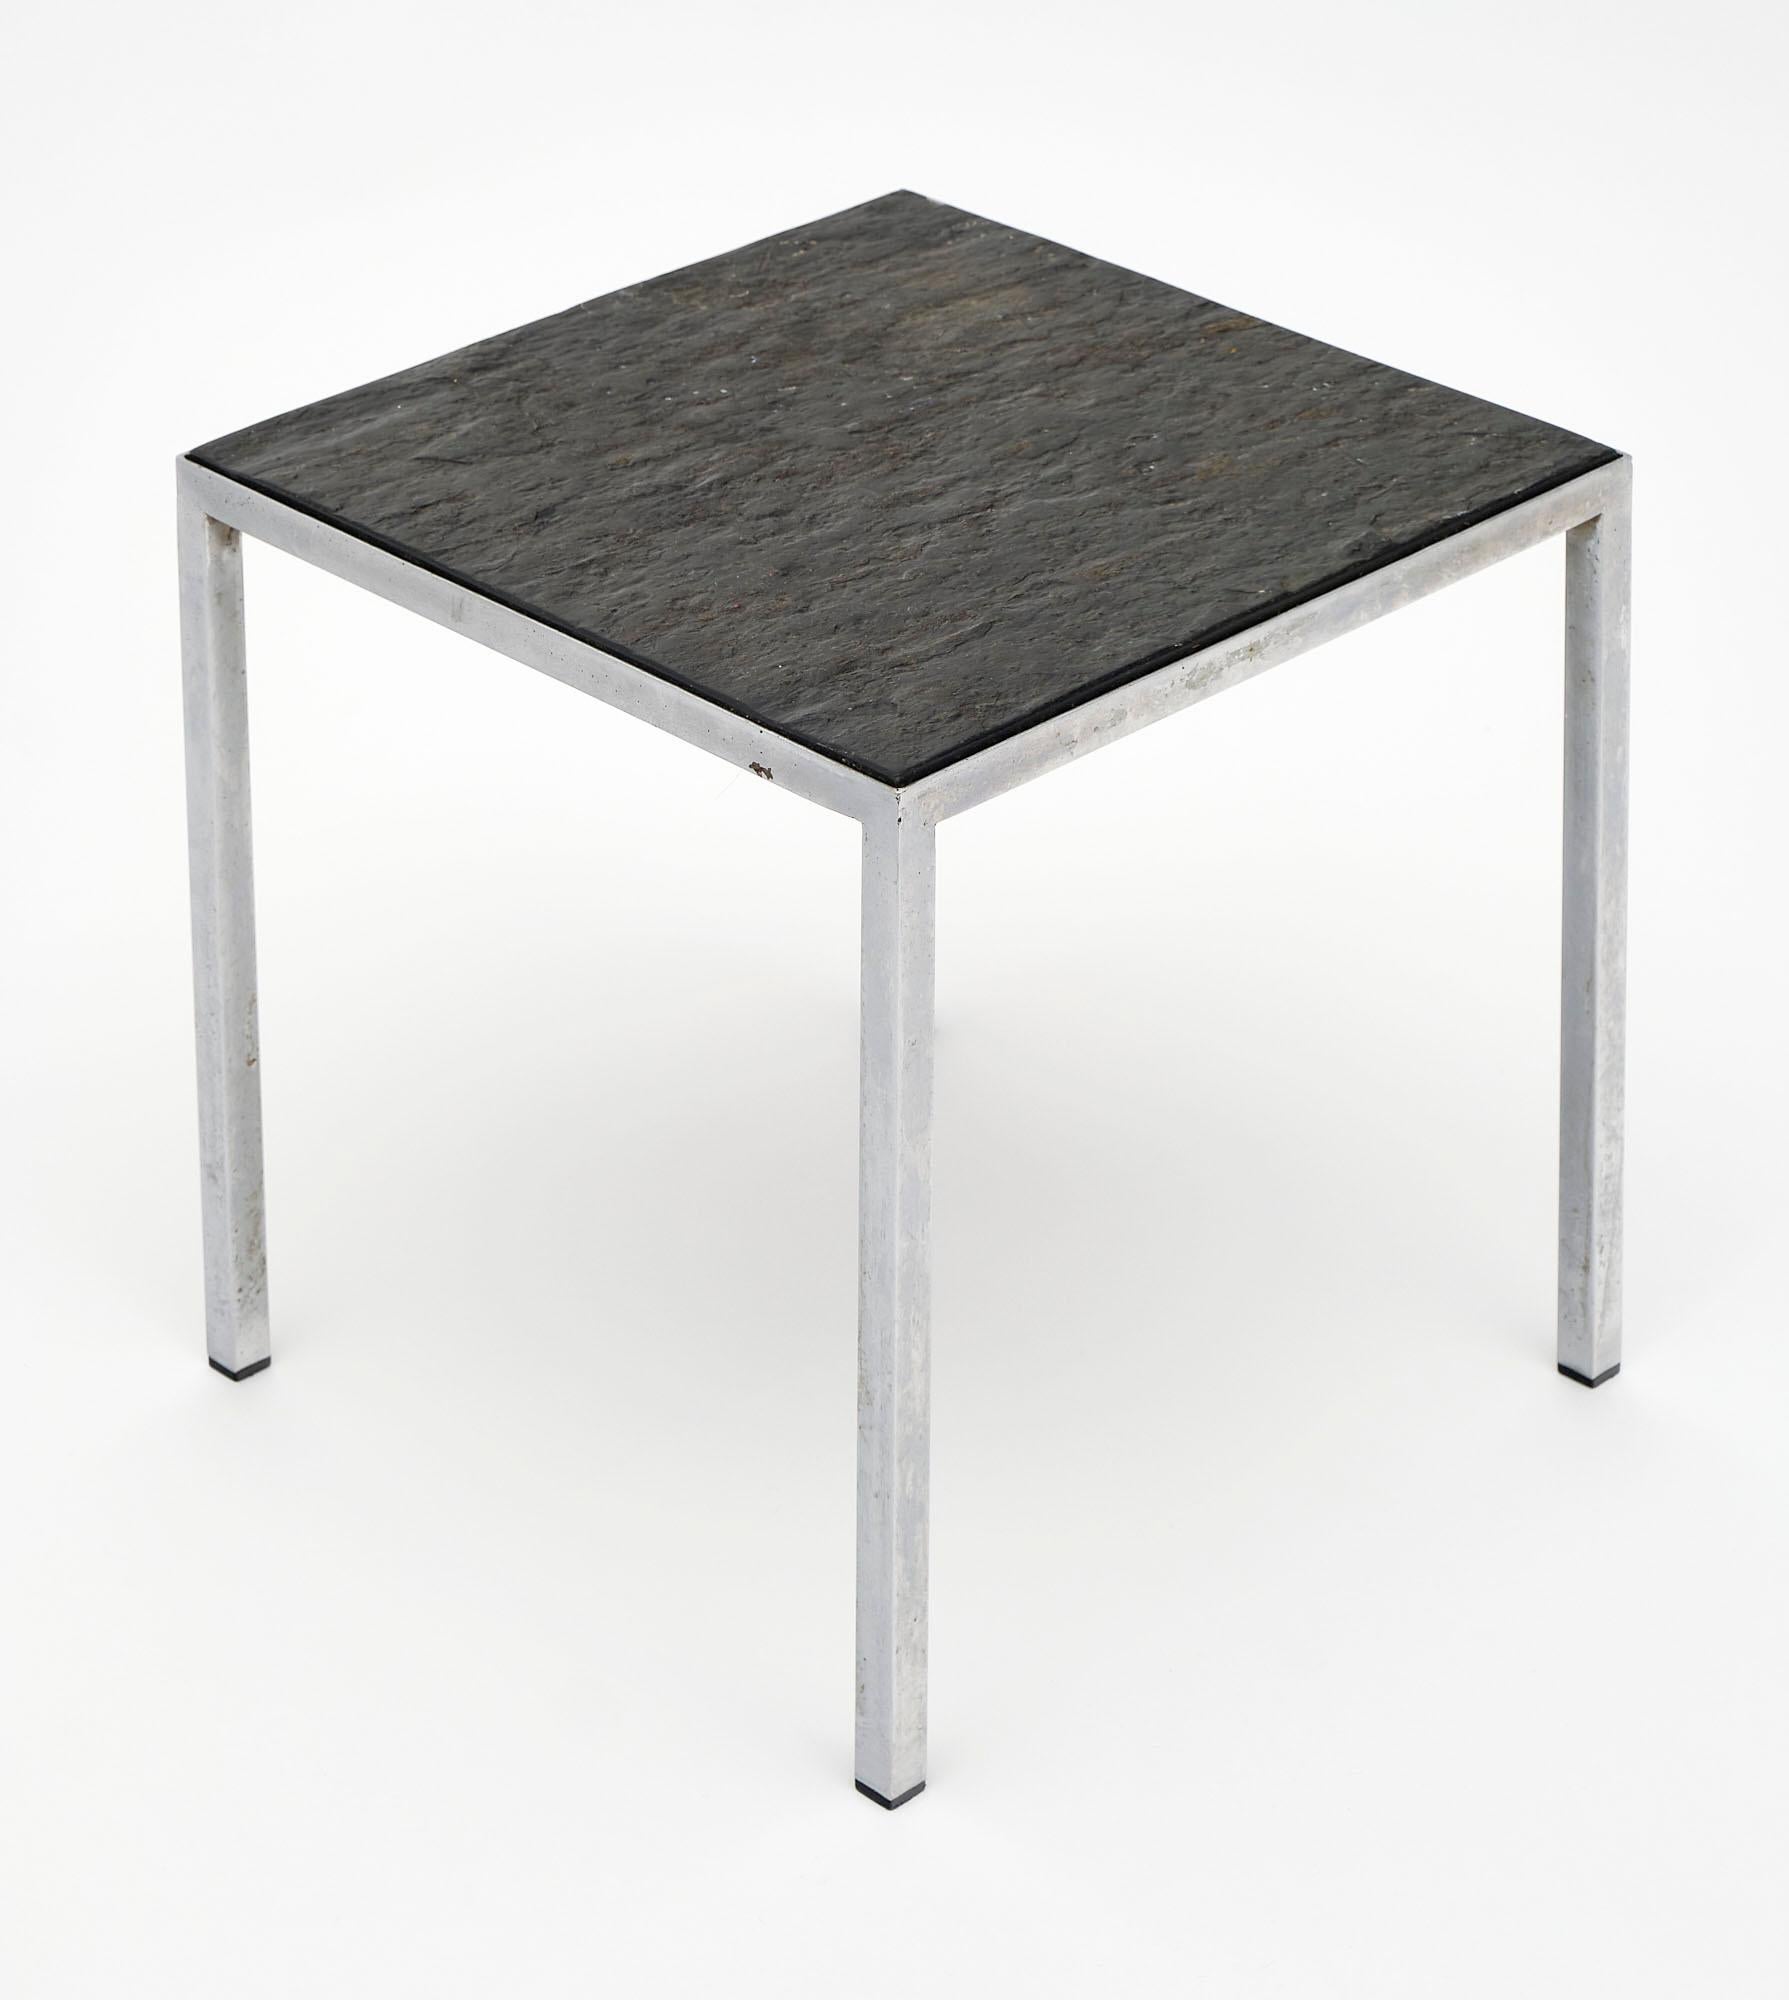 French side table with a chrome metal base and stone top. The superb lines of this piece are clean and striking, especially in juxtaposition of the natural texture of the top.